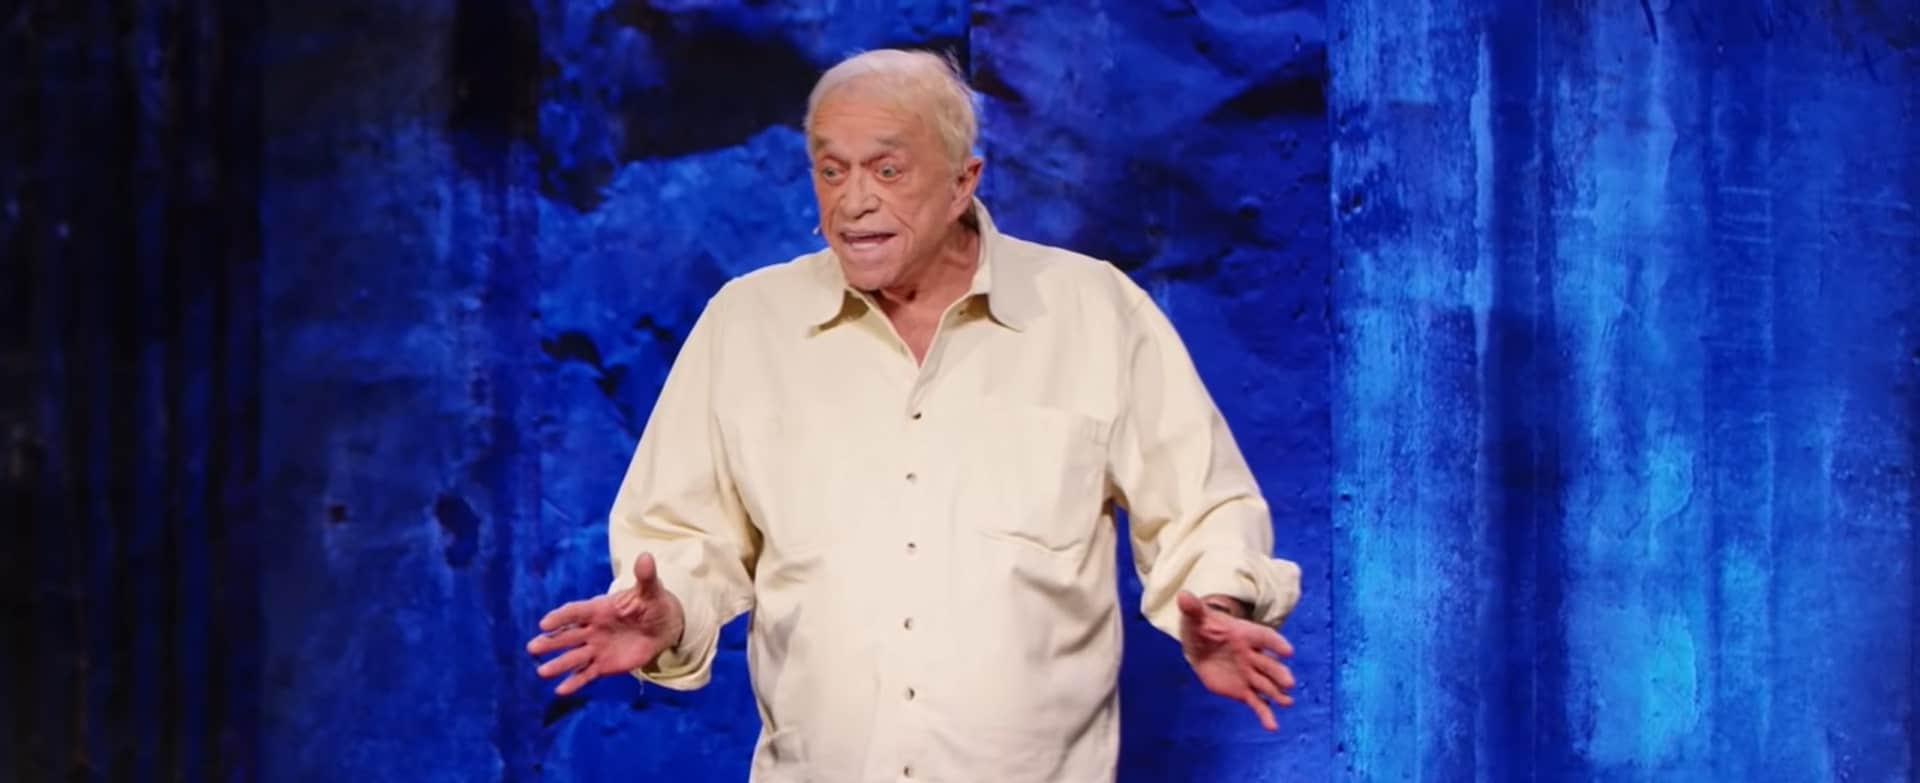 Image of James Gregory after losing weight